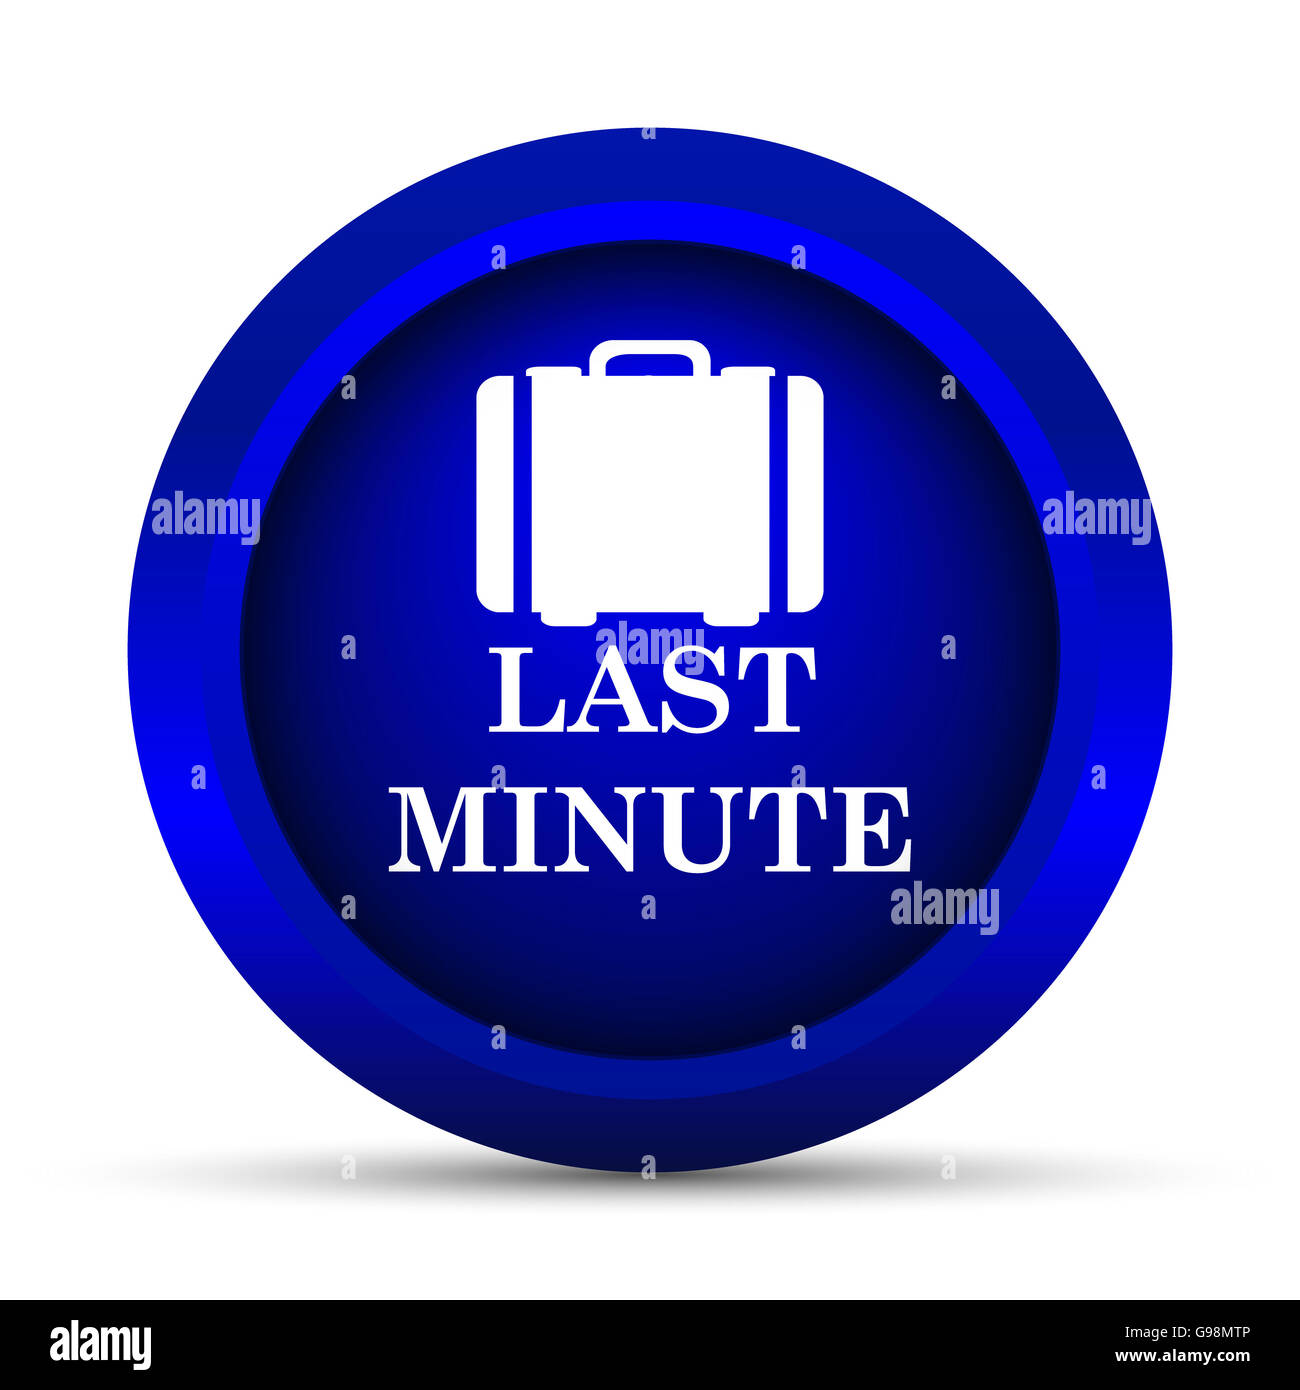 https://c8.alamy.com/comp/G98MTP/last-minute-icon-internet-button-on-white-background-G98MTP.jpg